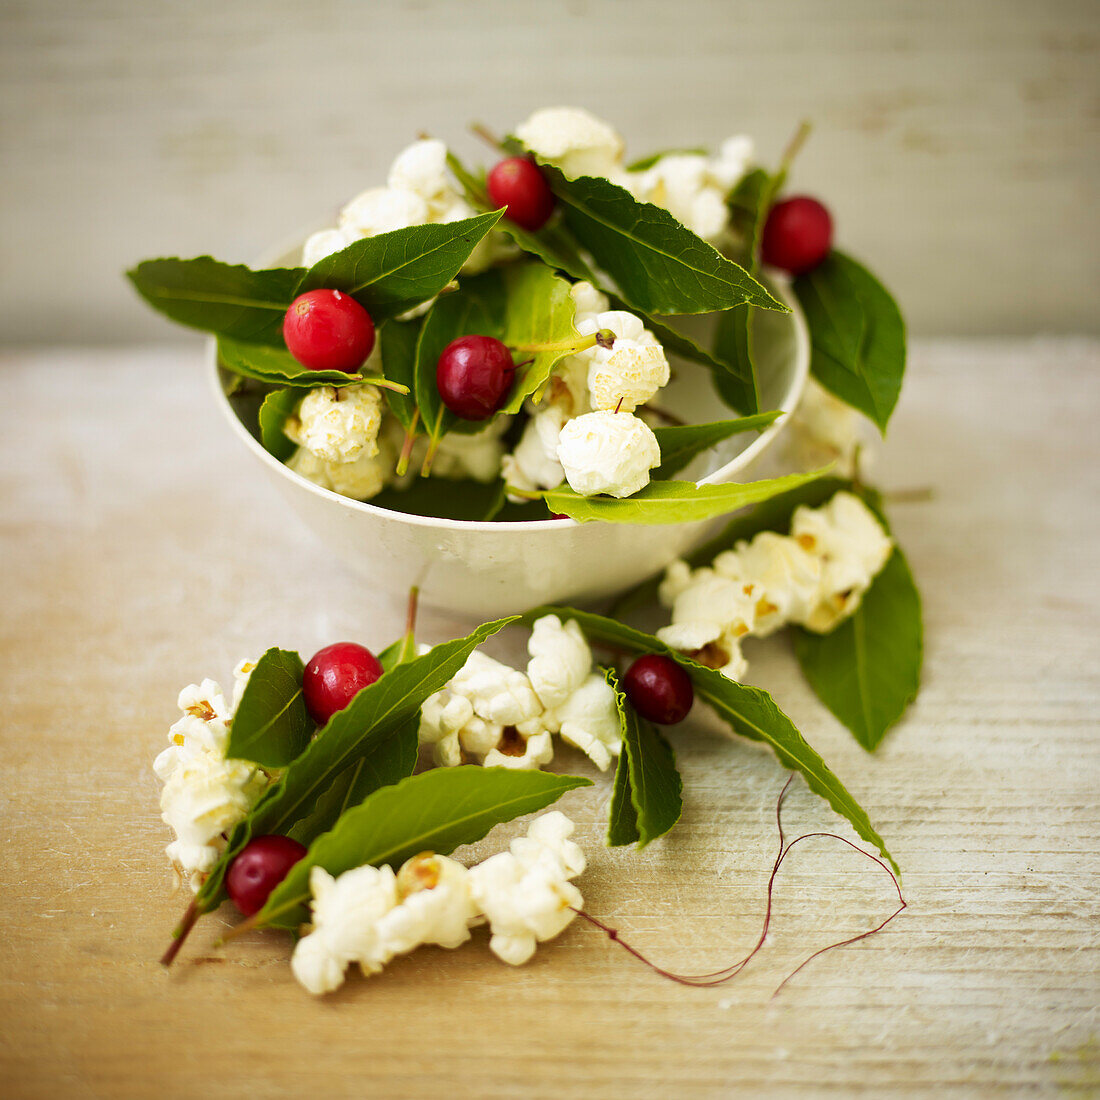 Popcorn garland with bay leaves and cranberries